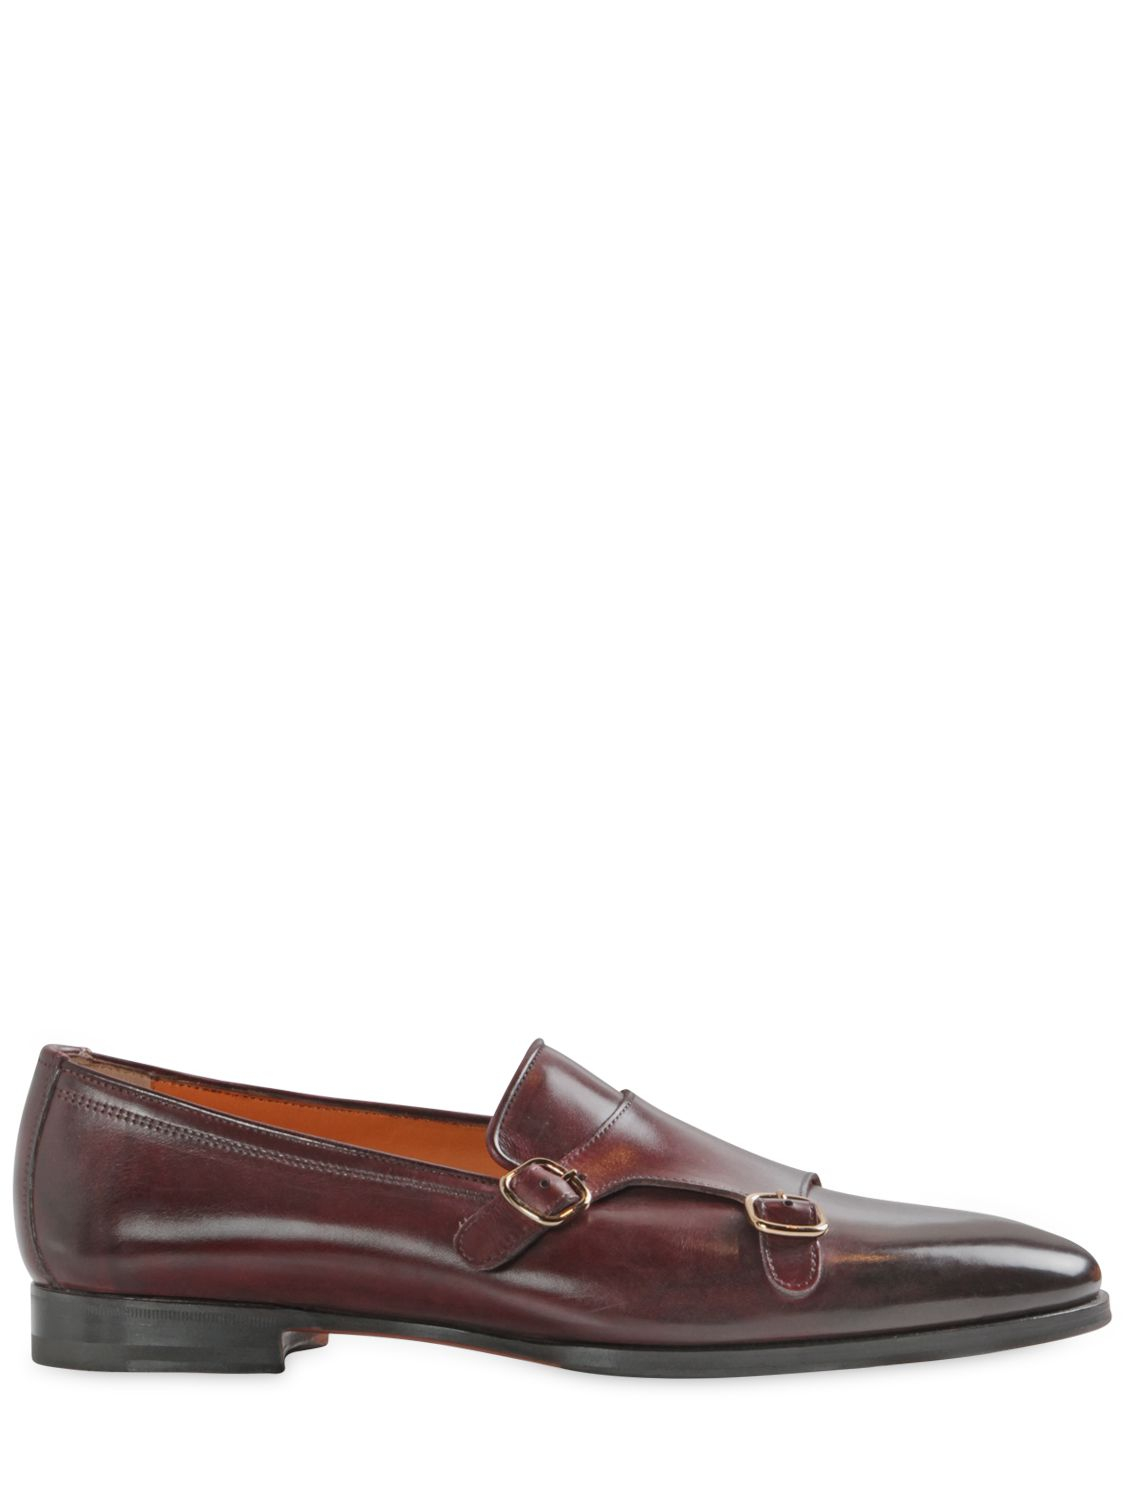 Lyst - Santoni Hand-Painted Leather Monk Strap Loafers in Red for Men